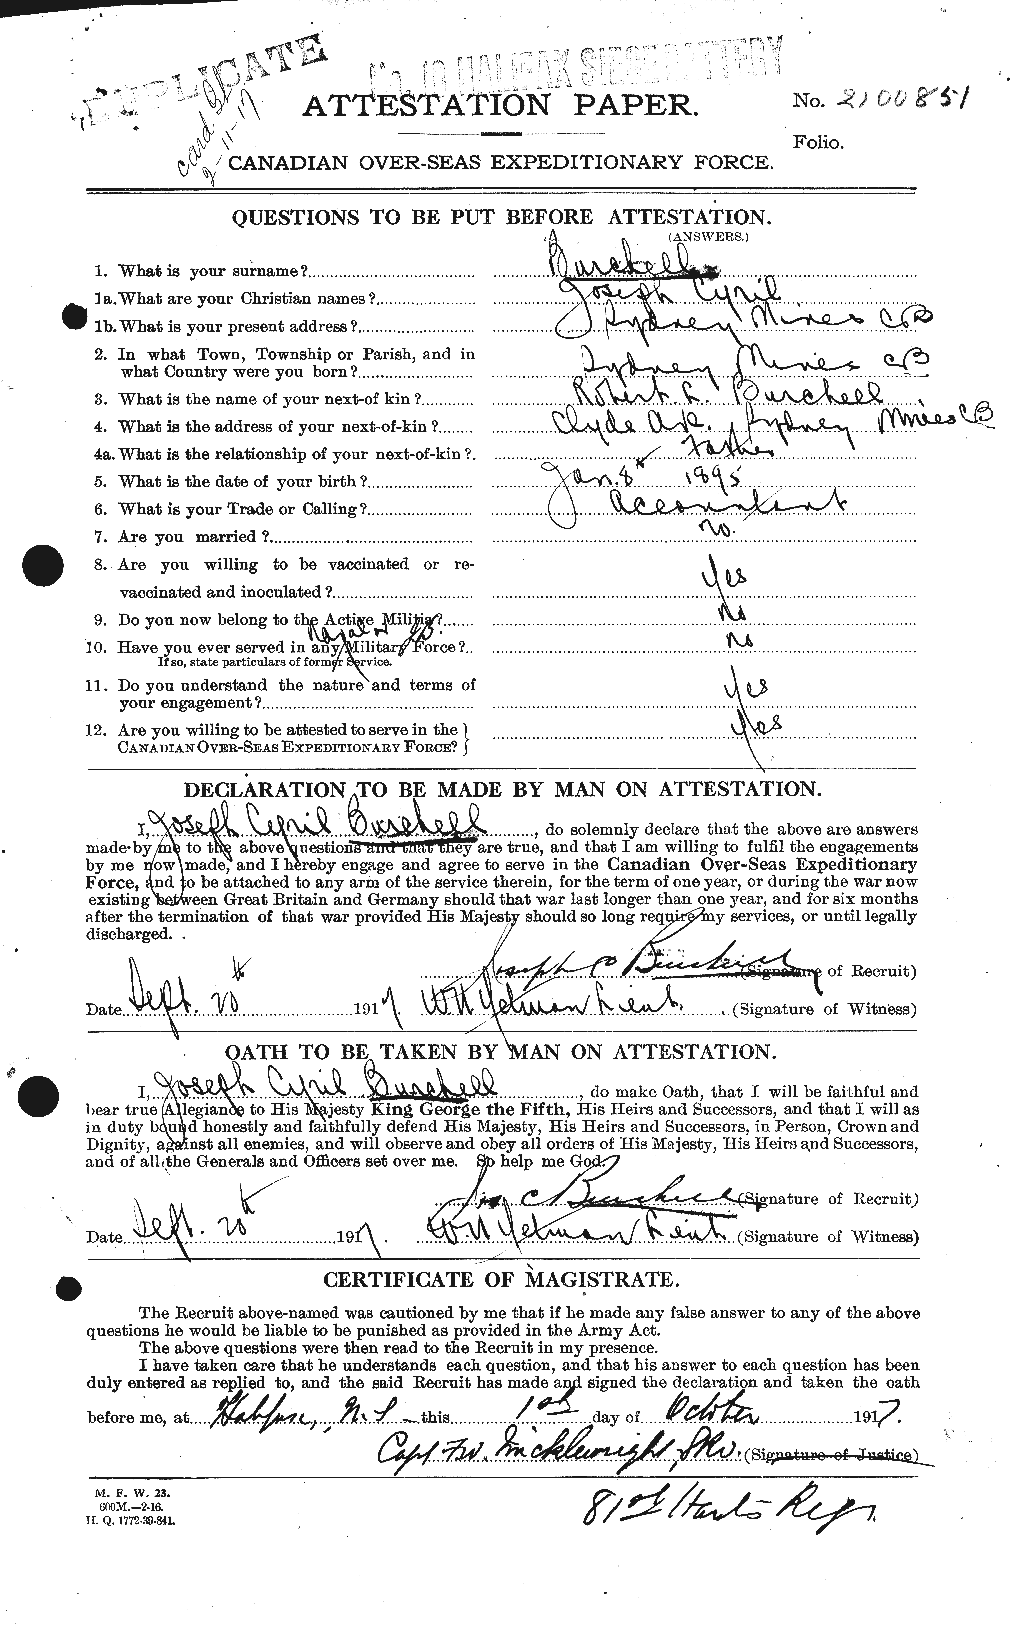 Personnel Records of the First World War - CEF 273155a